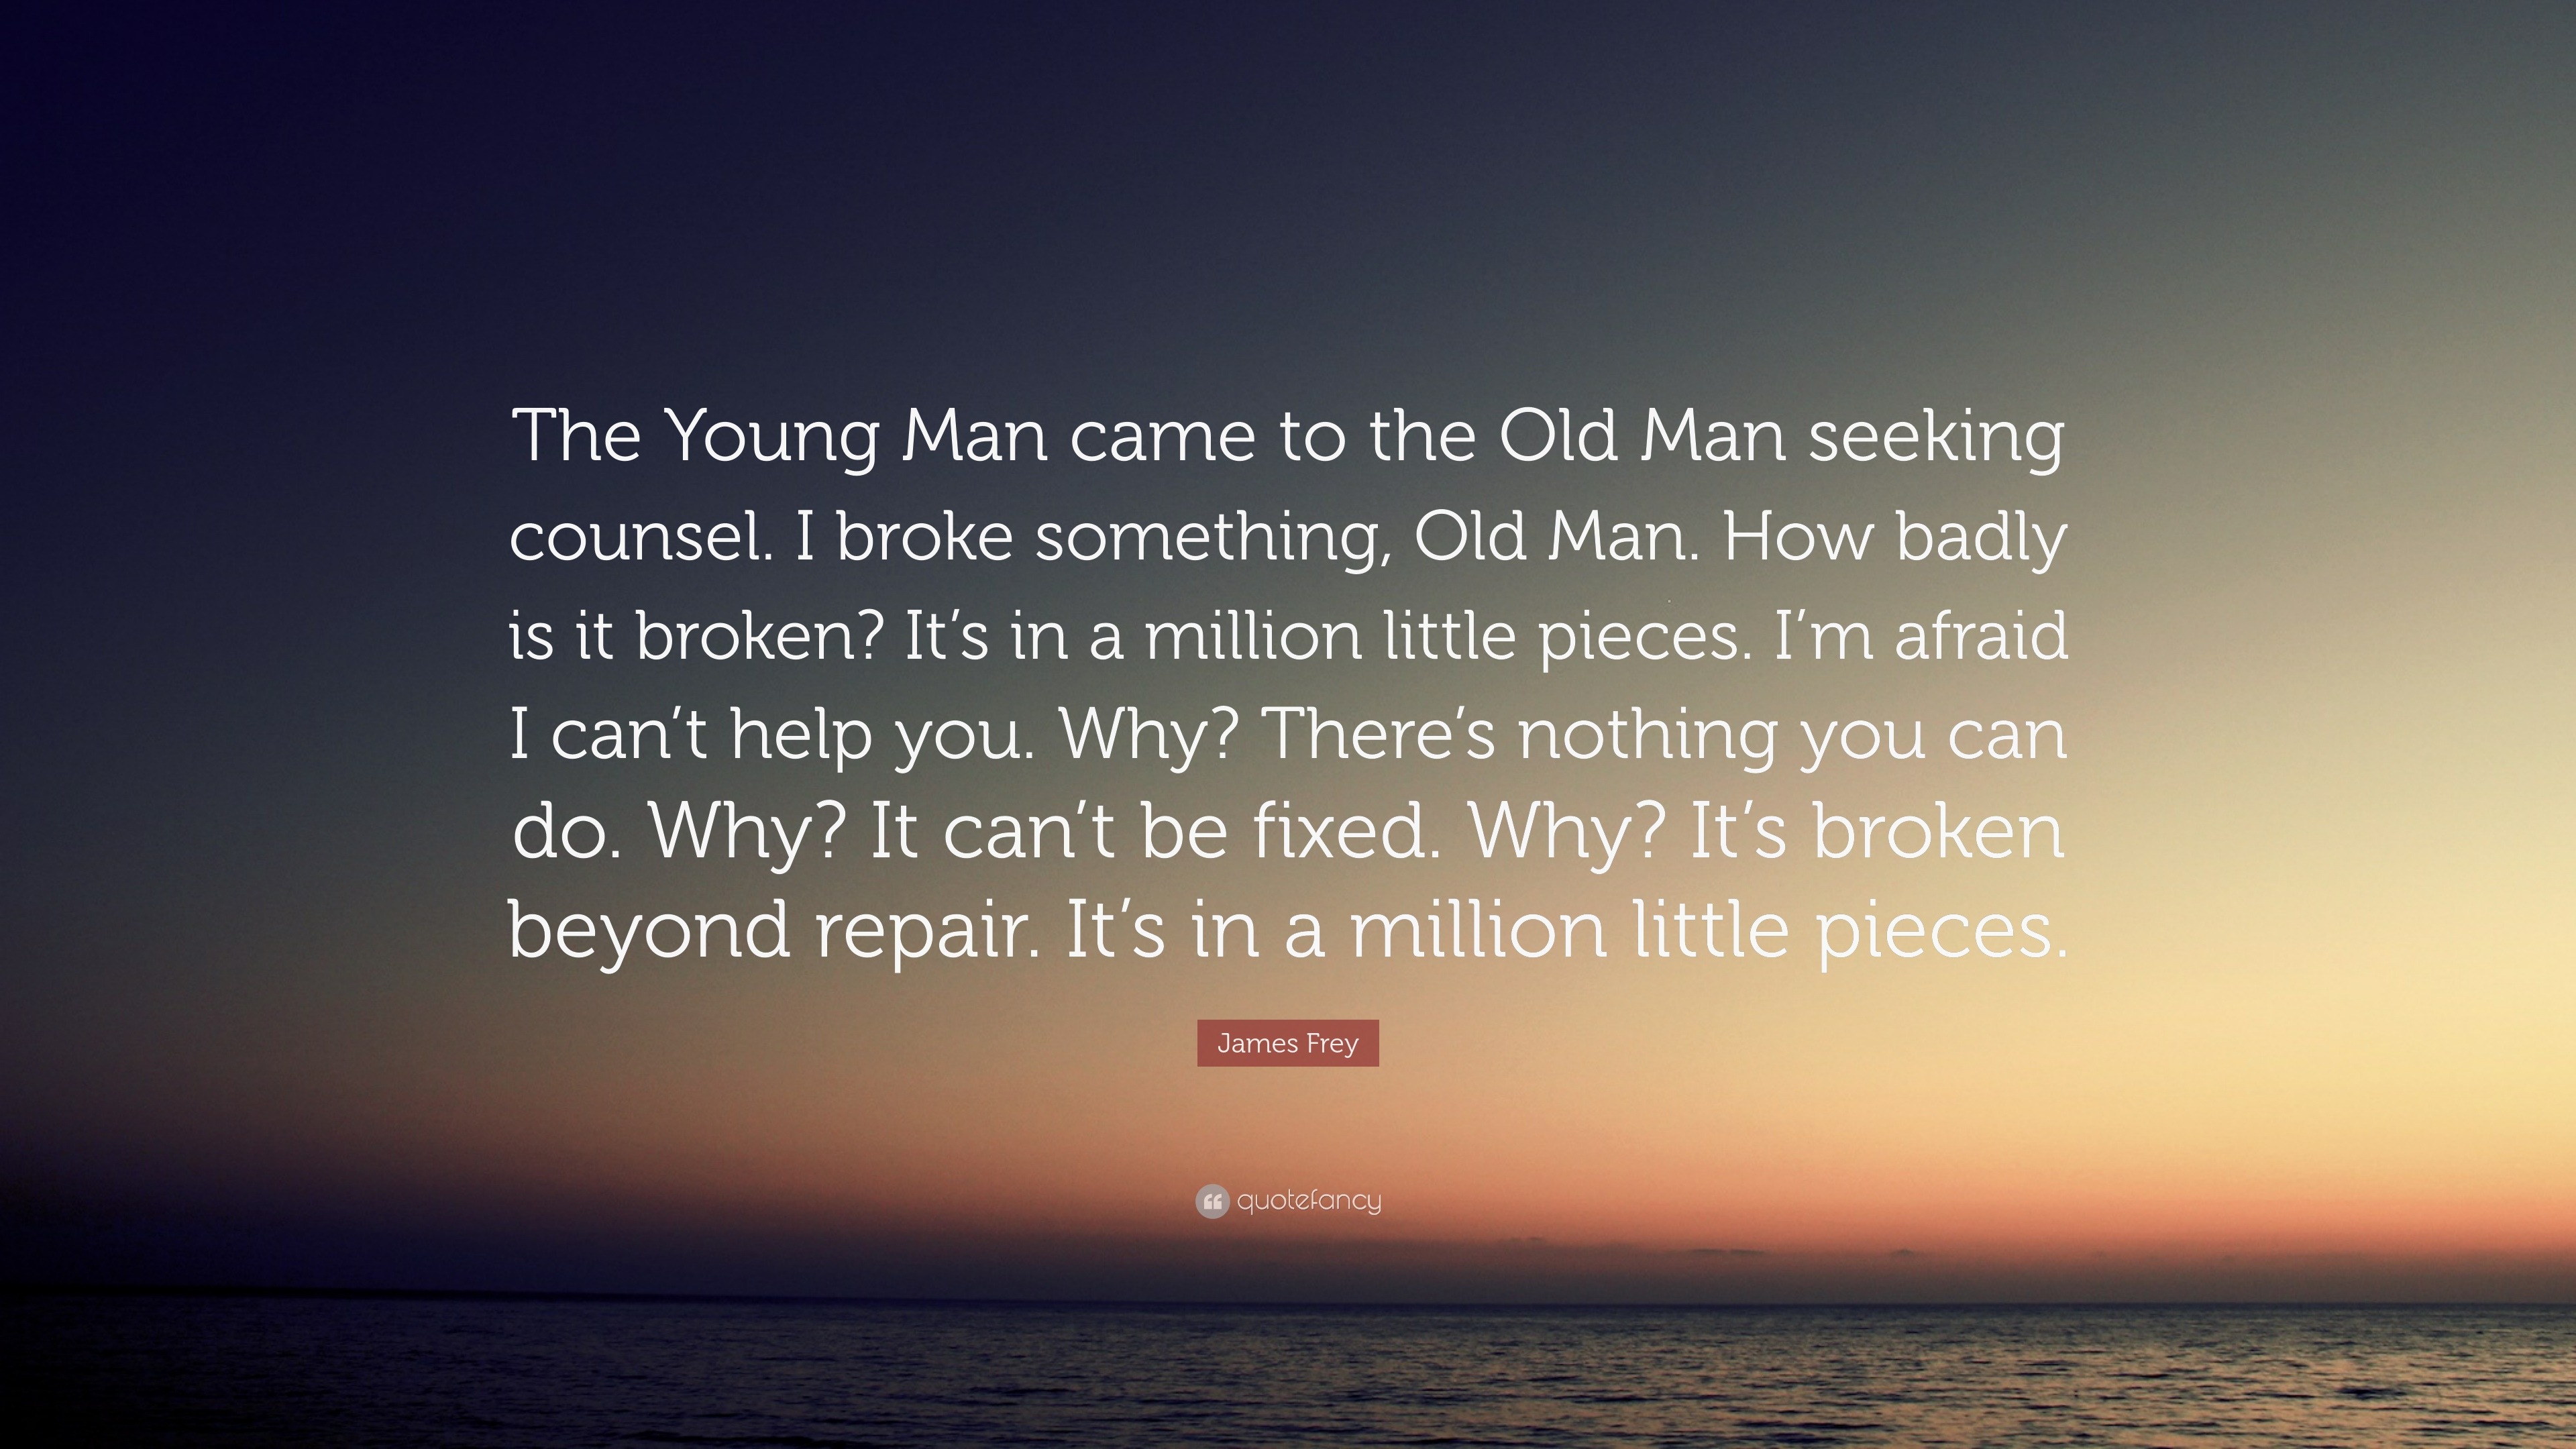 James Frey Quote “The Young Man came to the Old Man seeking counsel